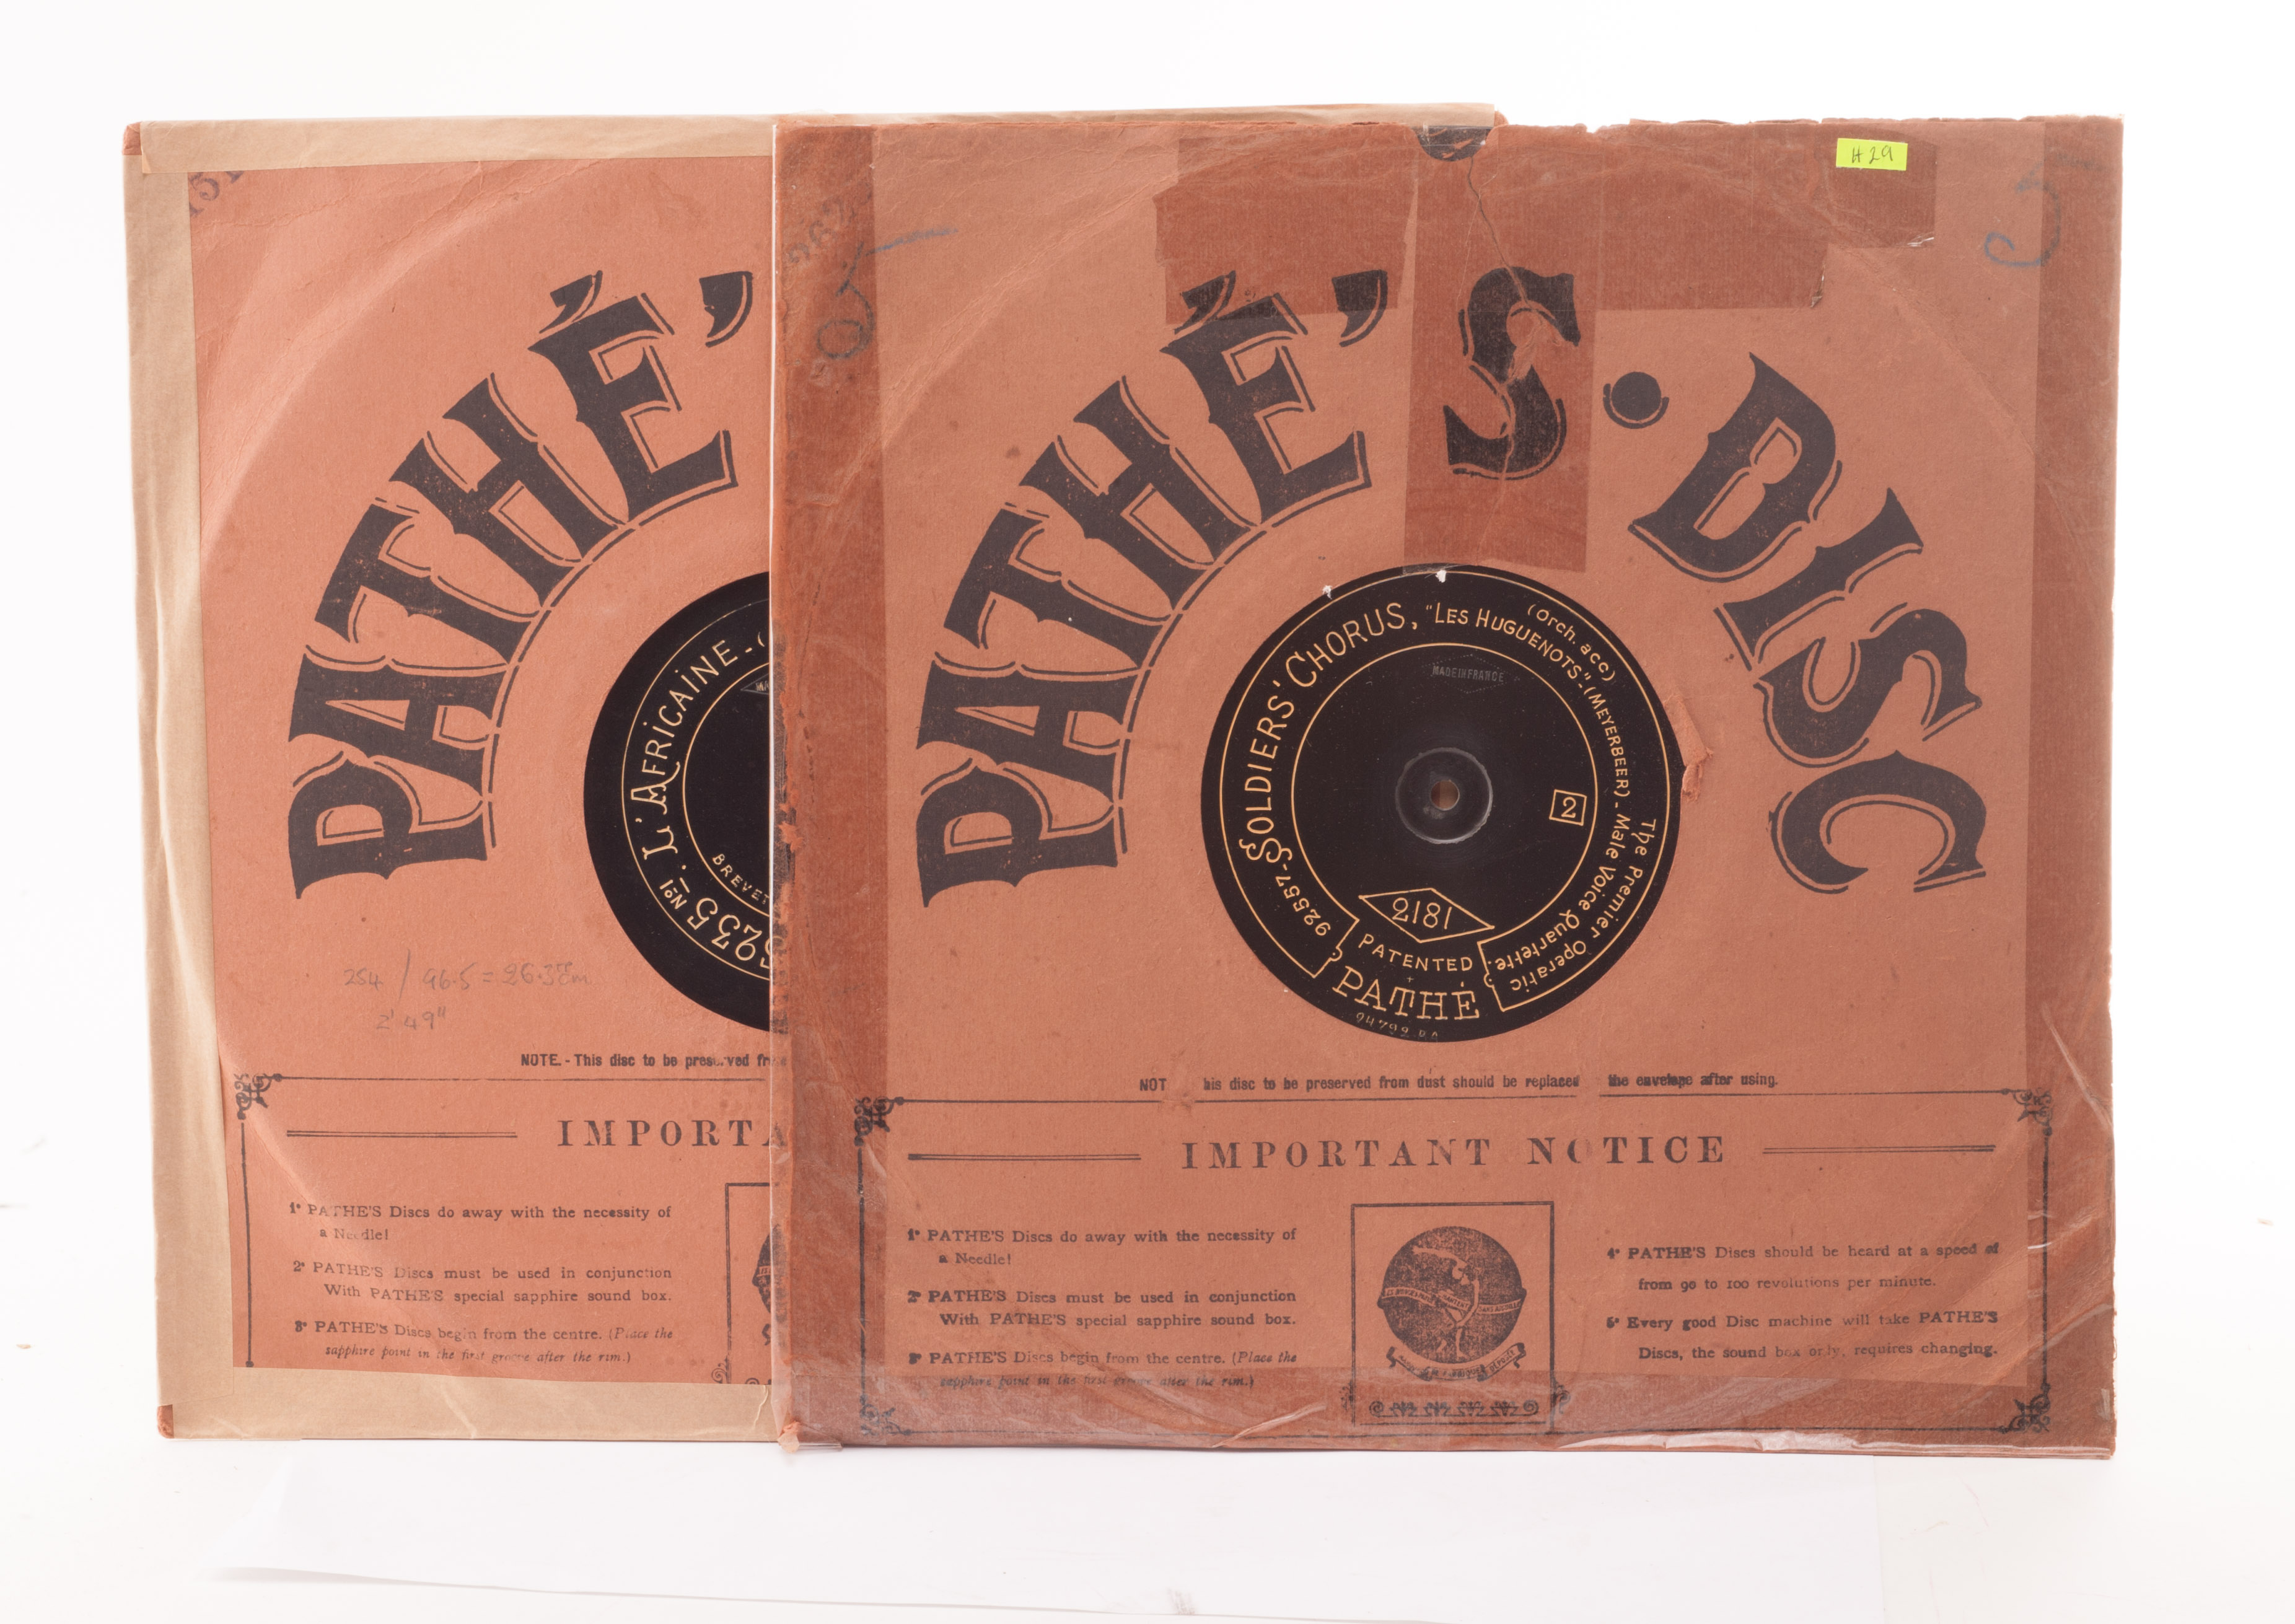 Pathé discs: Nine, 35 cm, band and orchestral, operatic overtures and extracts (9)